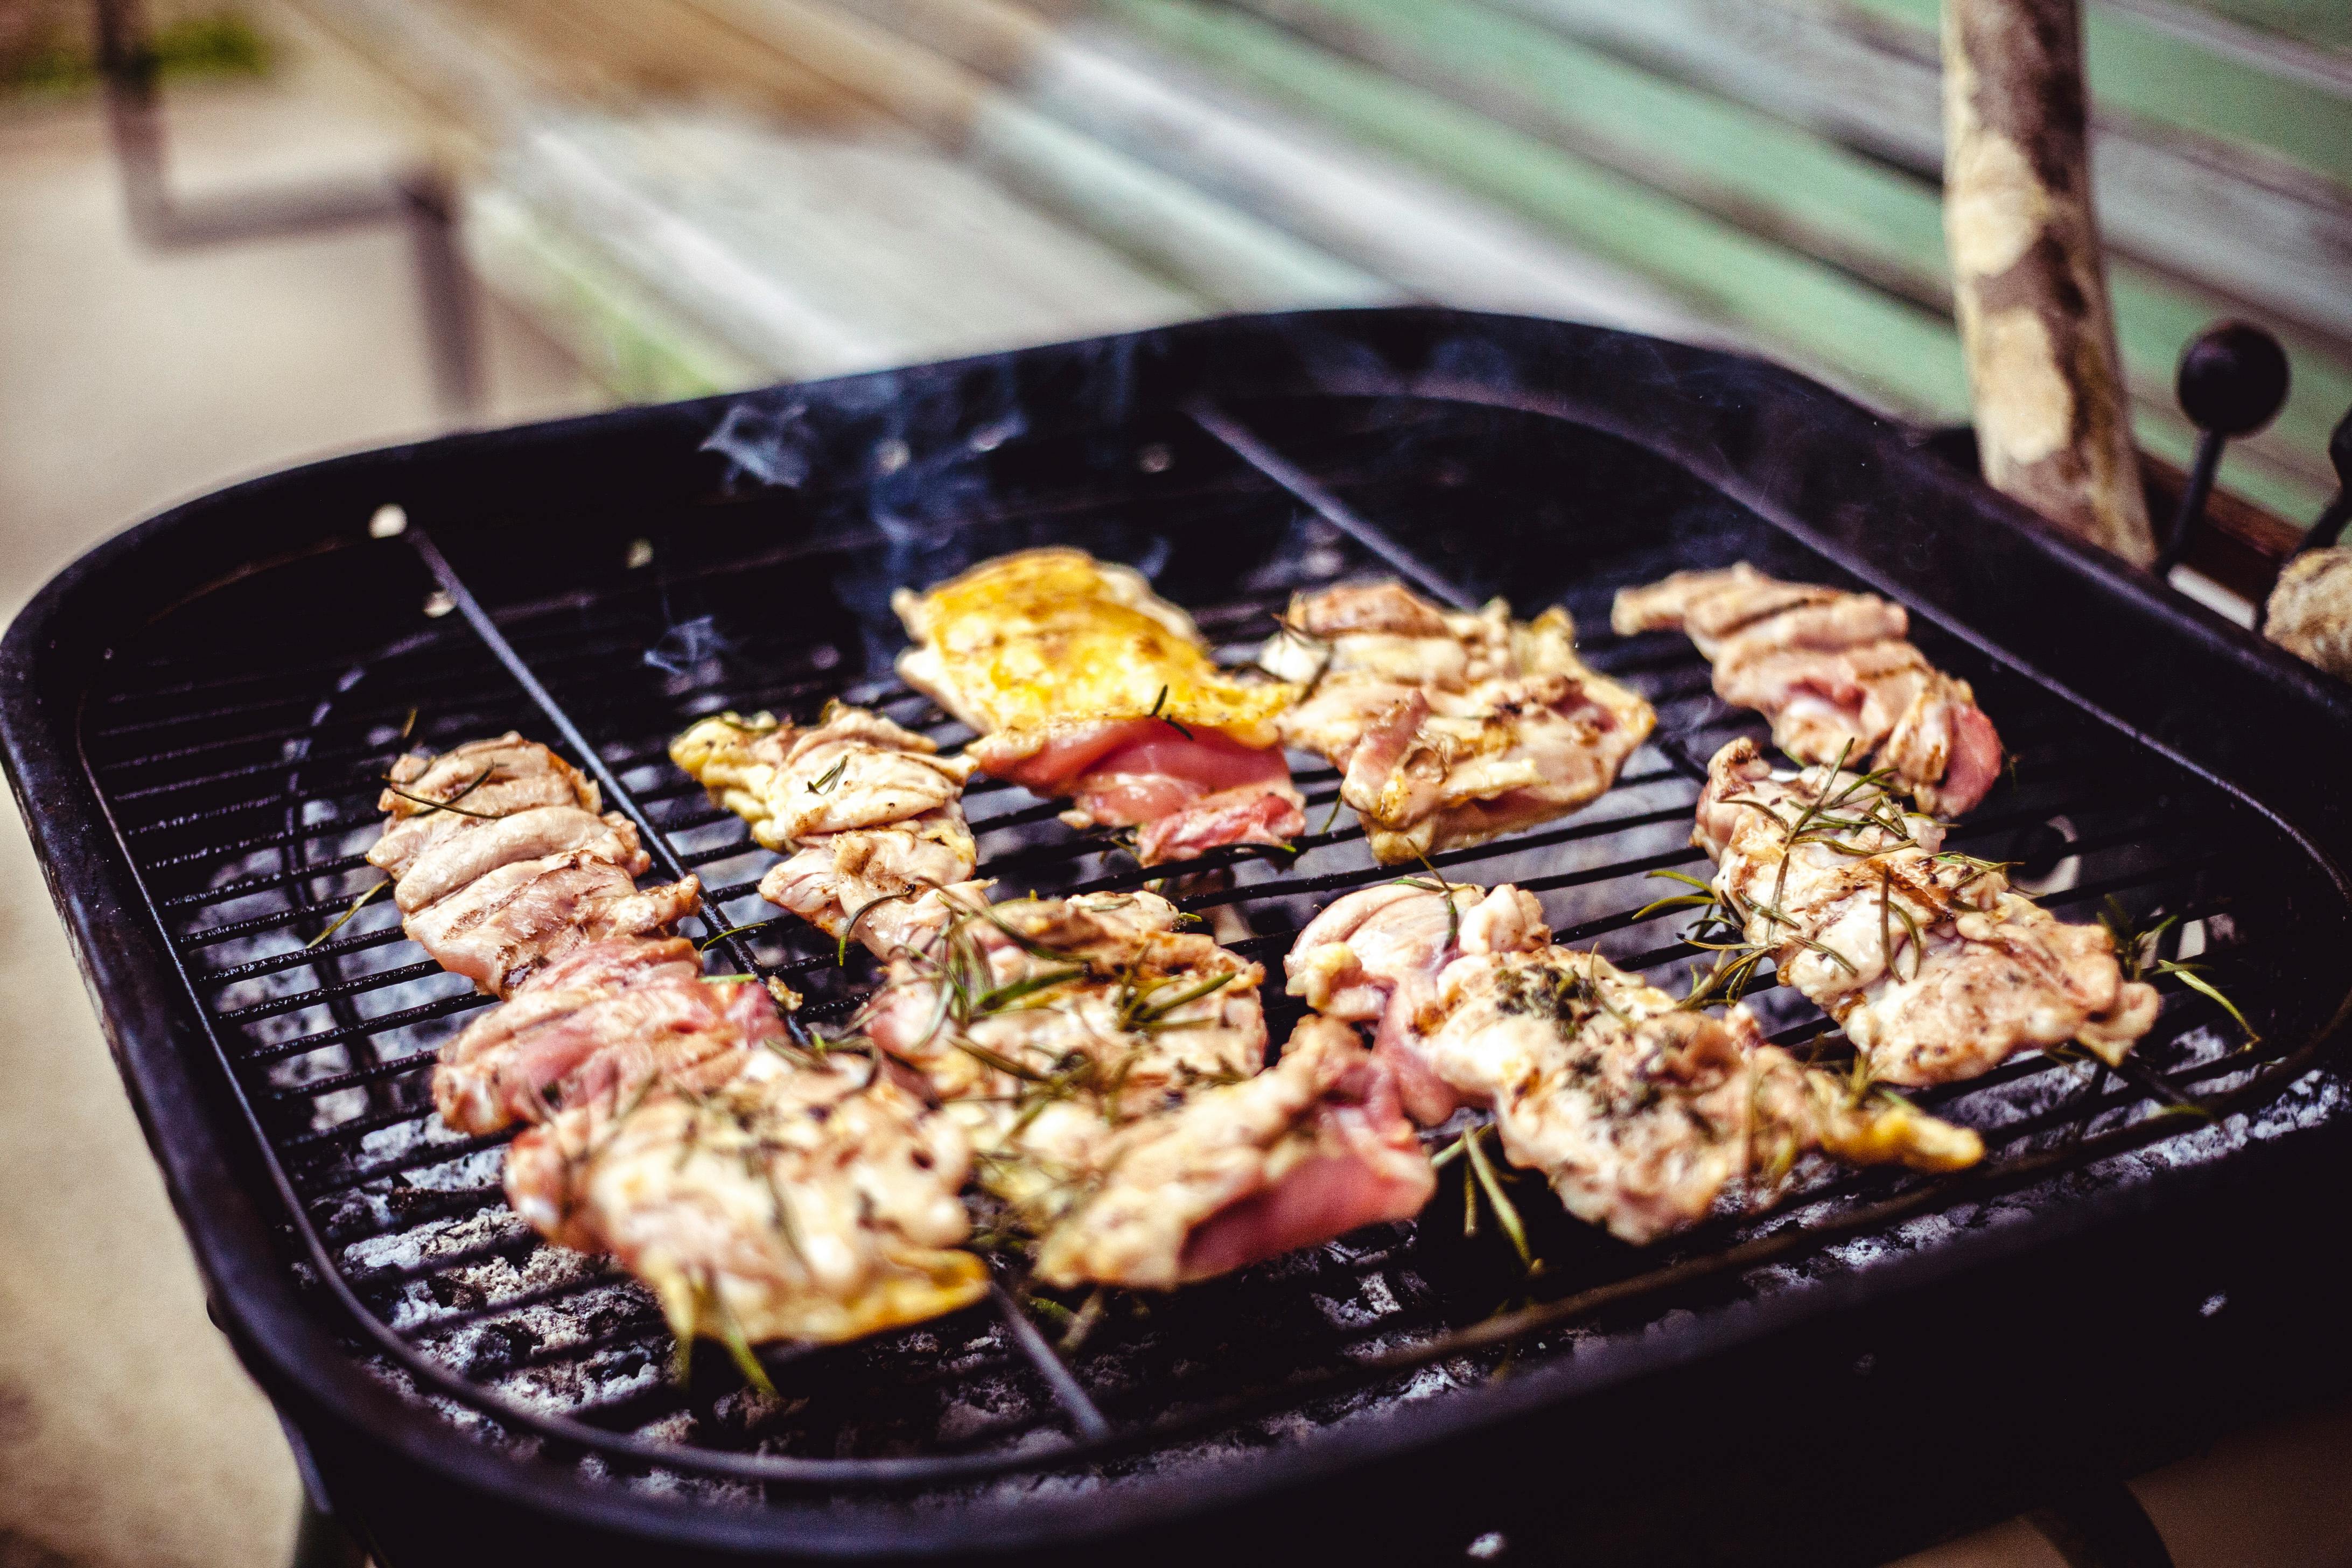 How to Prevent Meat From Sticking To a Grill